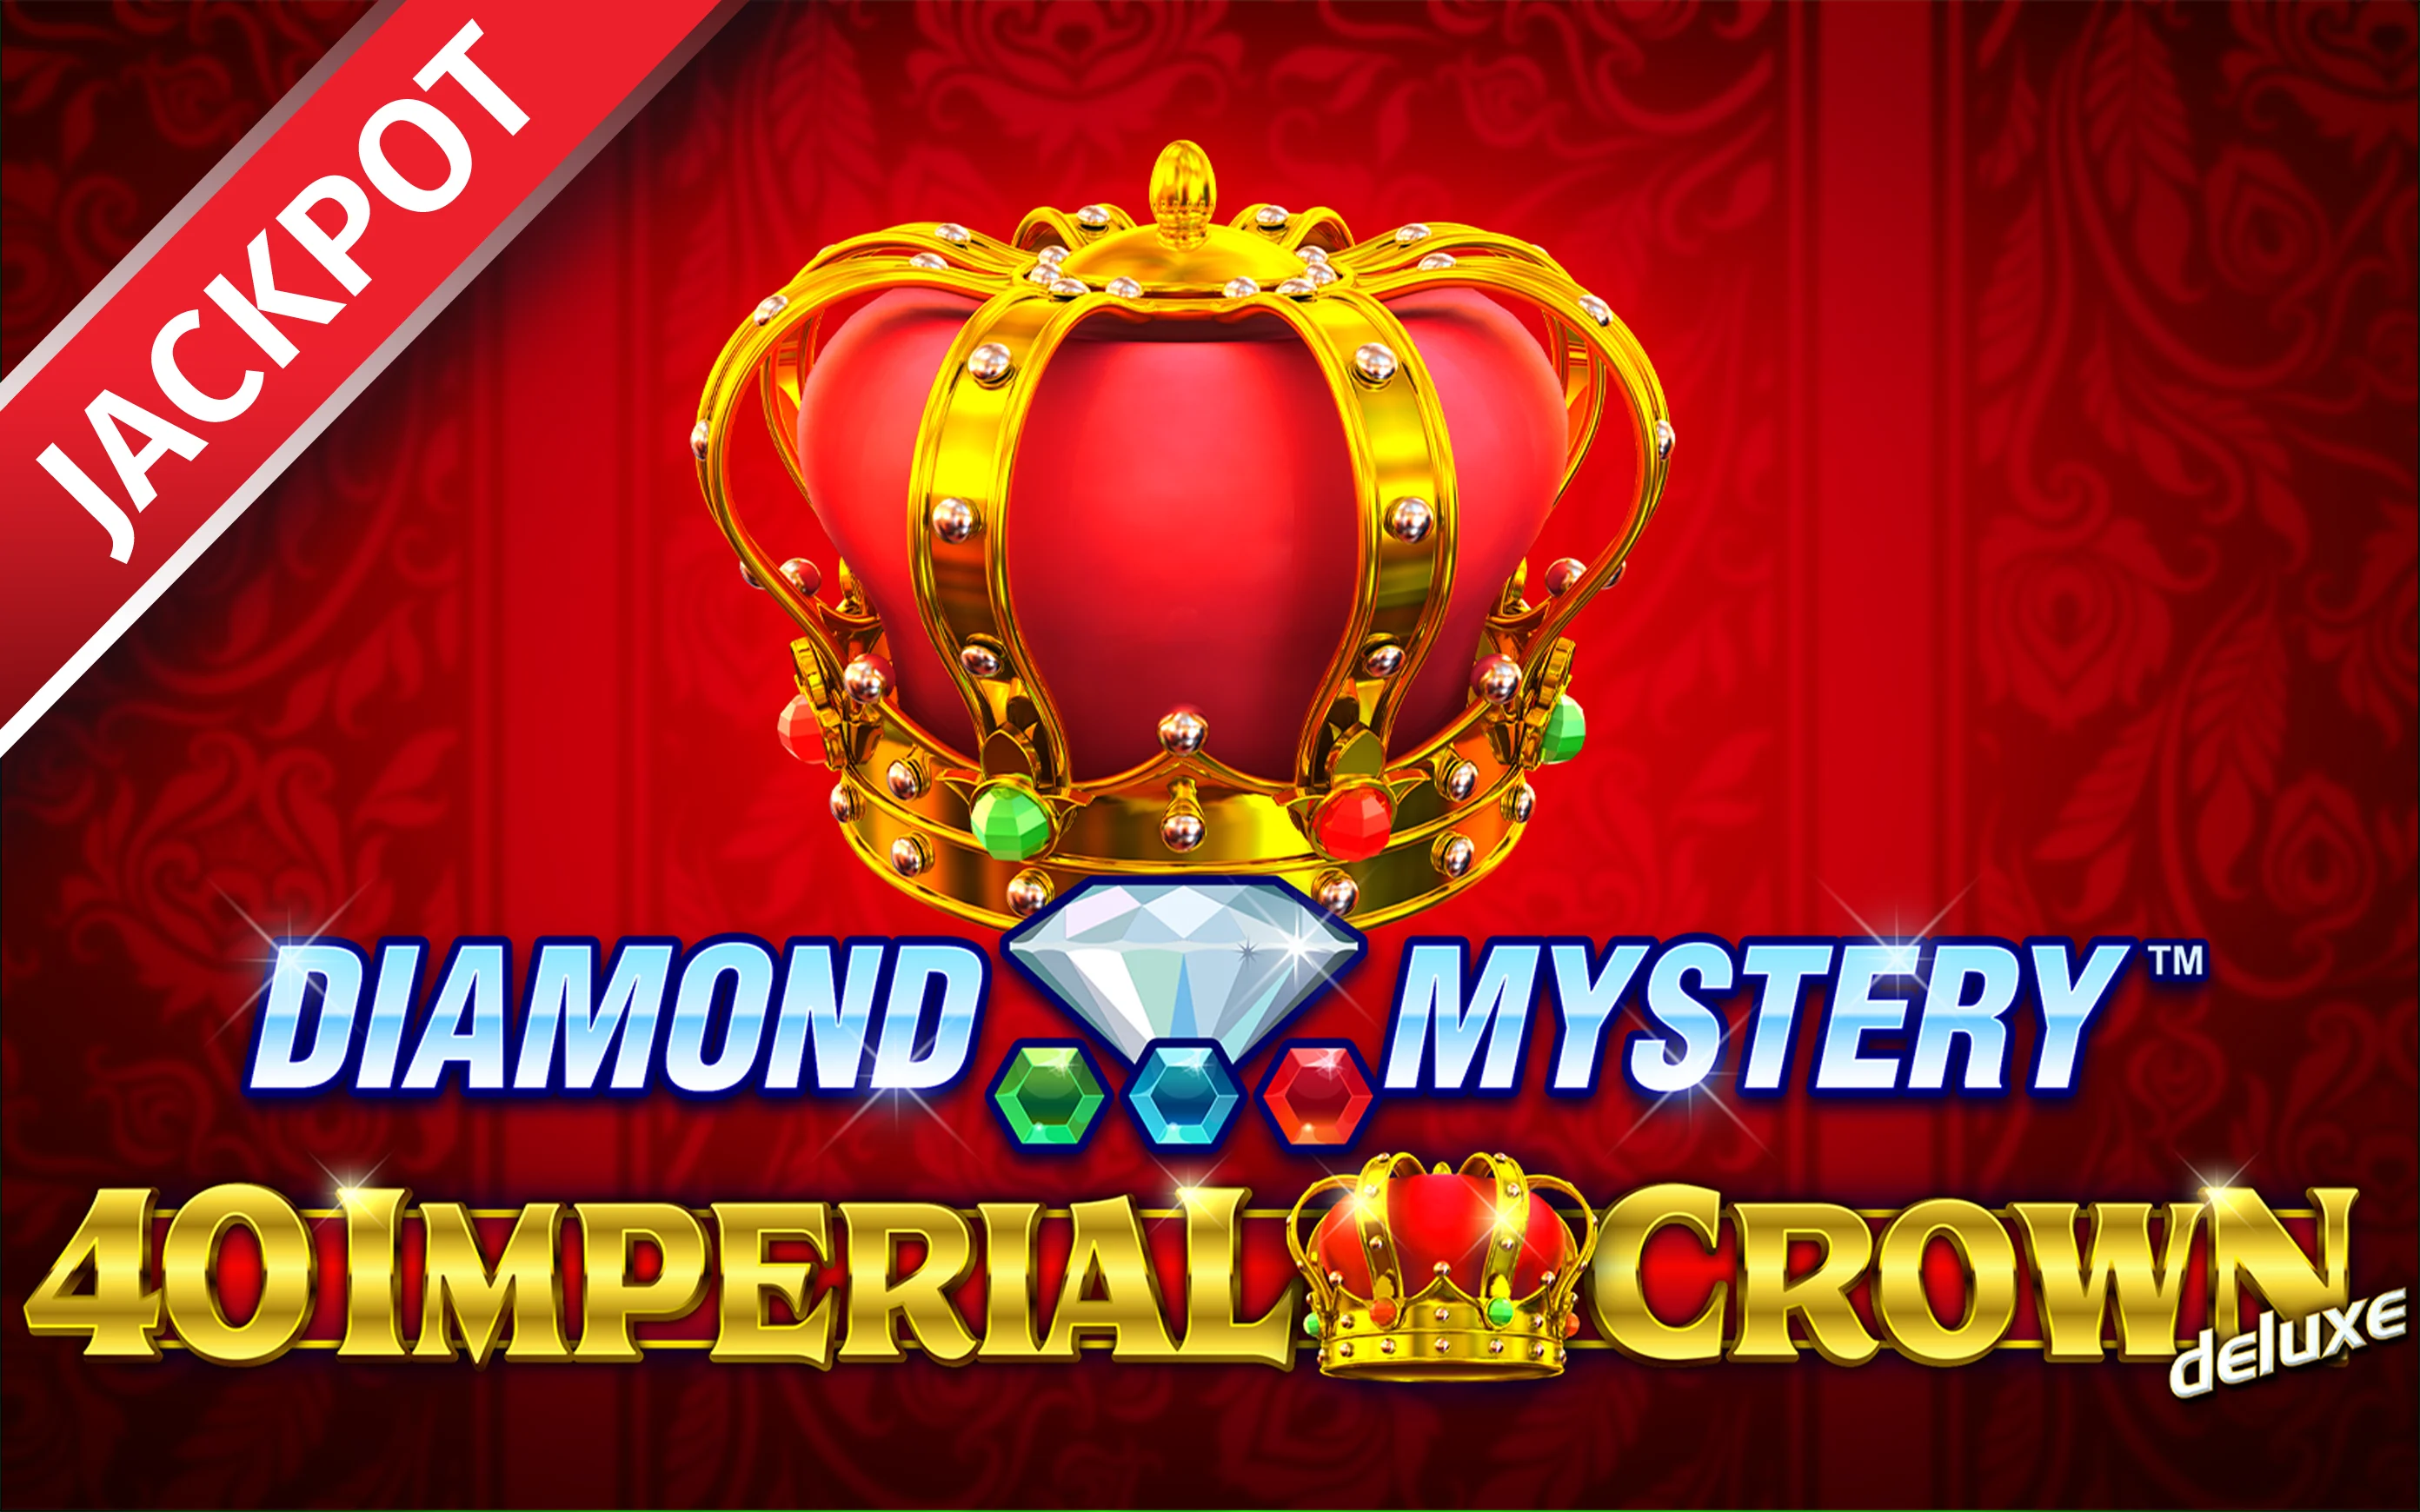 Jogue Diamond Mystery™ – 40 Imperial Crown deluxe no casino online Starcasino.be 